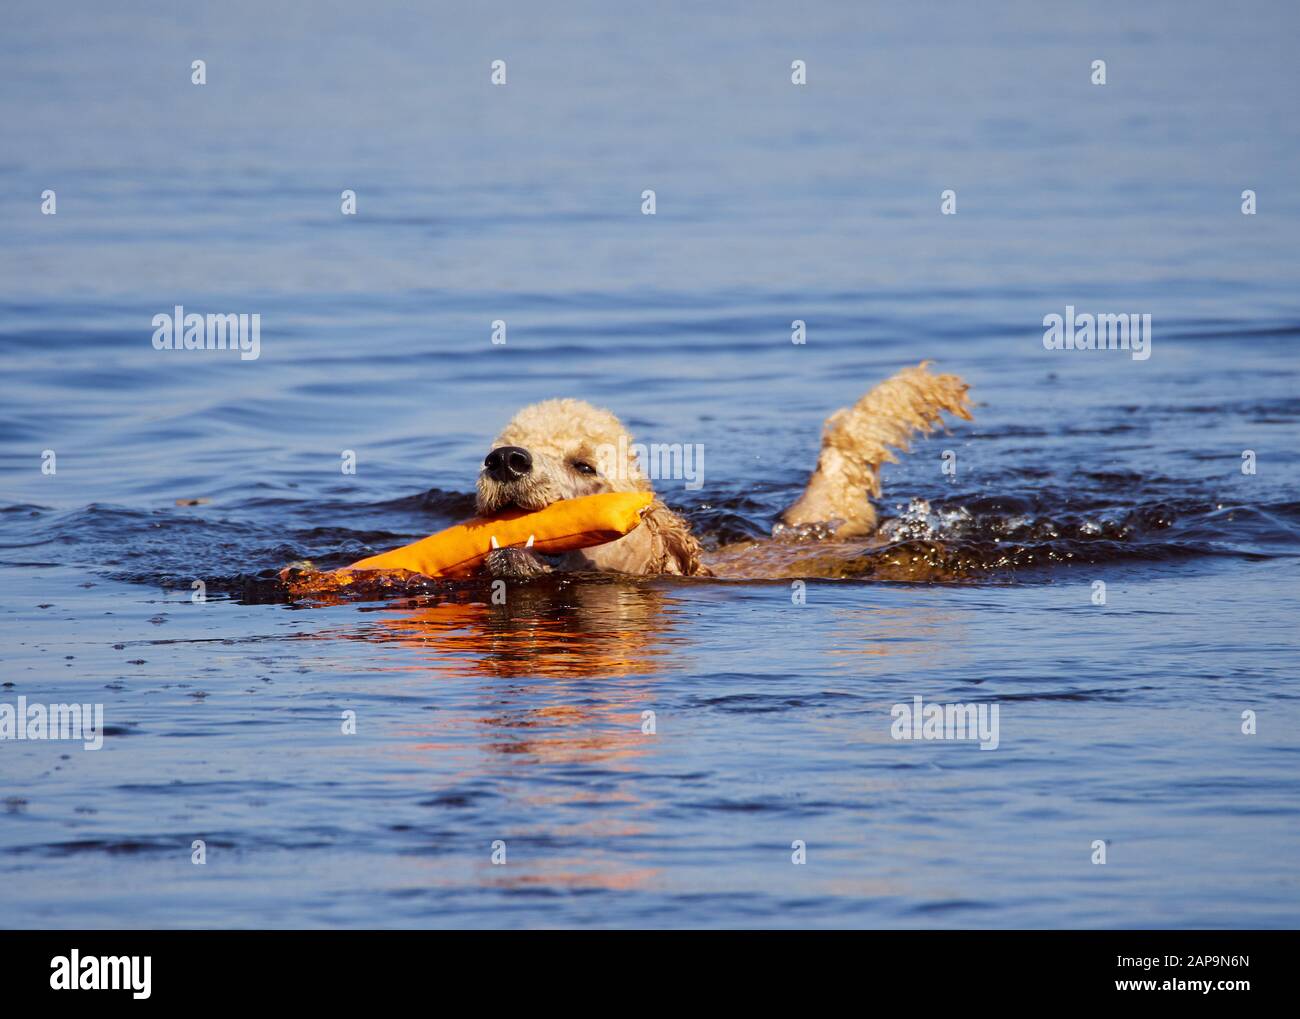 Standard poodle swimming on dog rescue service water training. Playing with an orange fetching toy in a lake  on a sunny summer day in Finland. Stock Photo